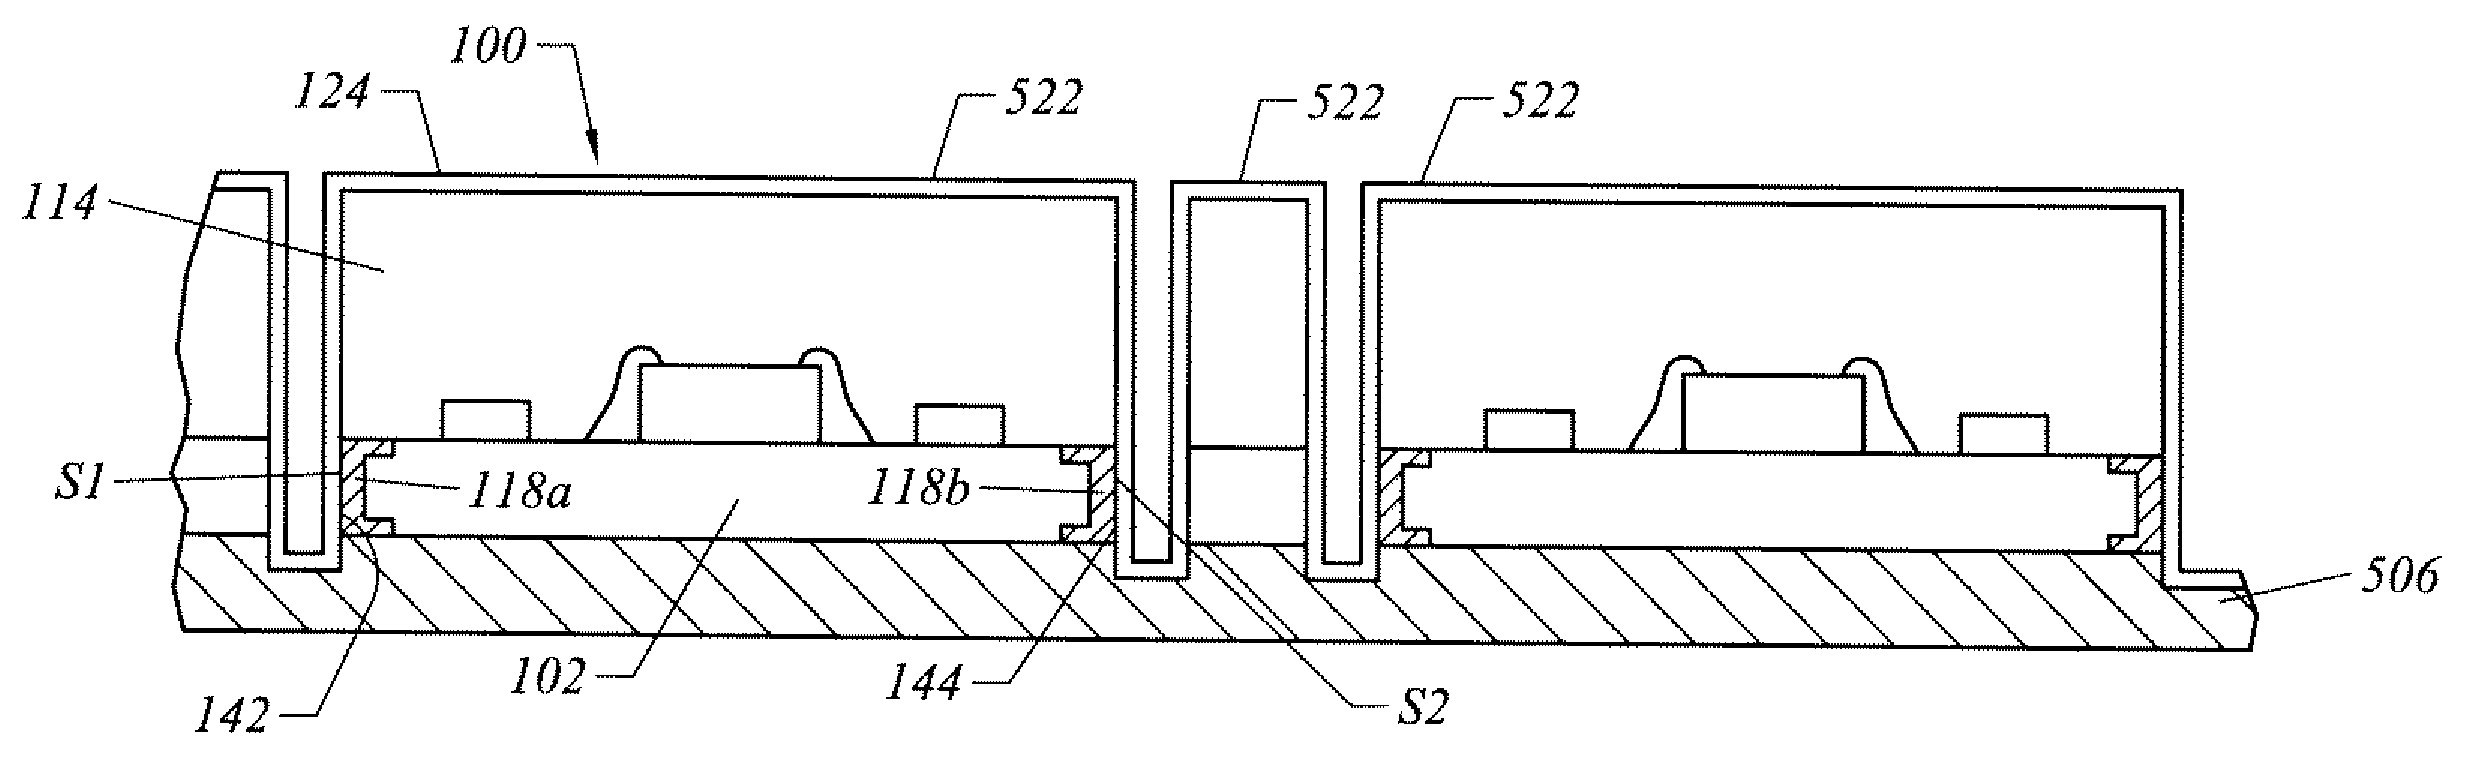 Semiconductor device packages with electromagnetic interference shielding